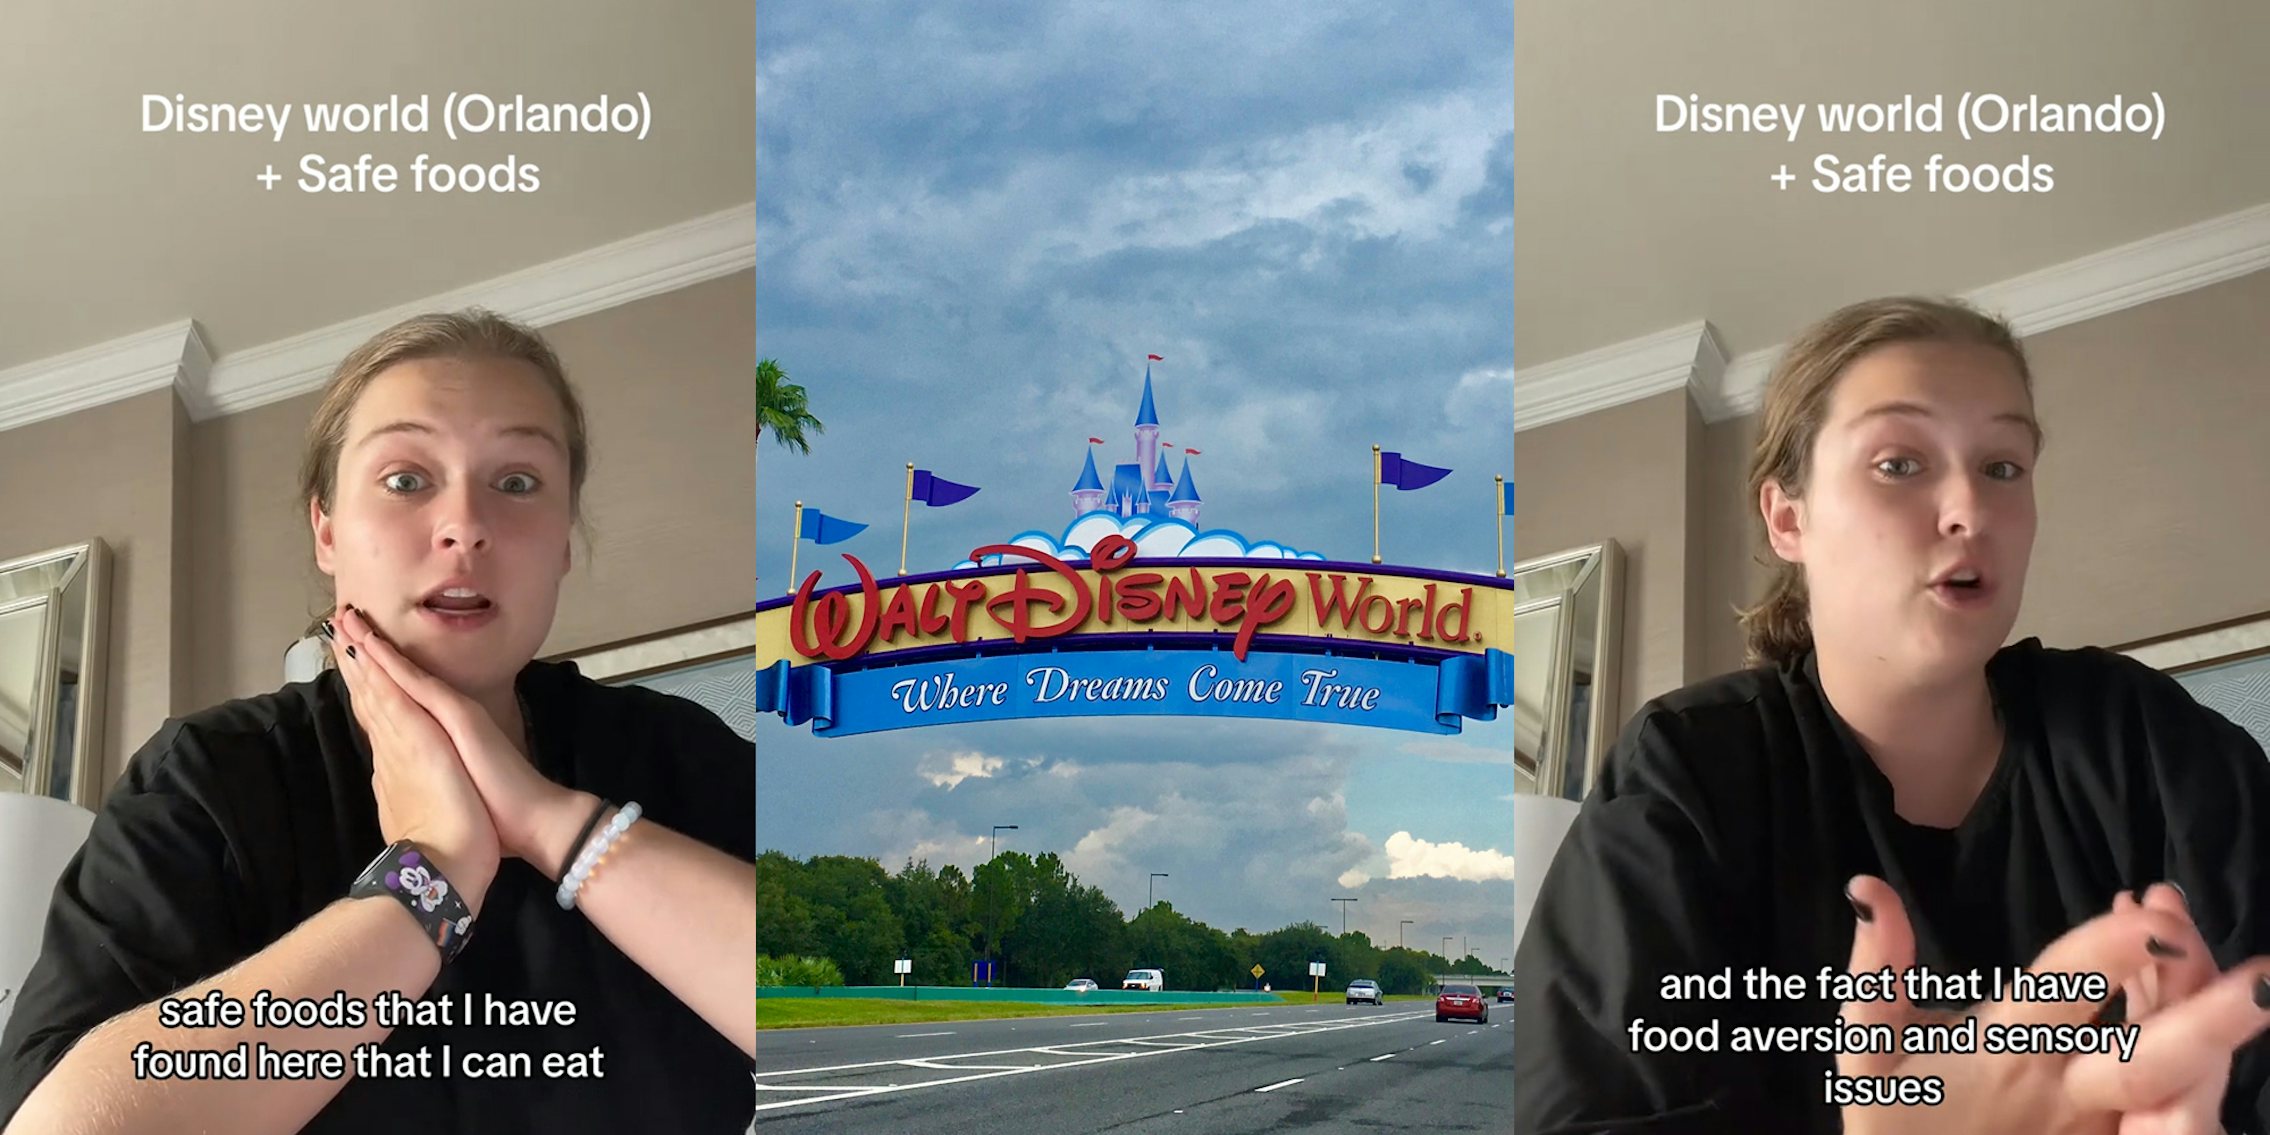 Disney World guest speaking with caption 'Disney world (Orlando) + Safe foods safe foods that I have found here that I can eat' (l) Disney World sign above road (c) Disney World guest speaking with caption 'Disney world (Orlando) + Safe foods and the fact that I have food aversion and sensory issues' (r)